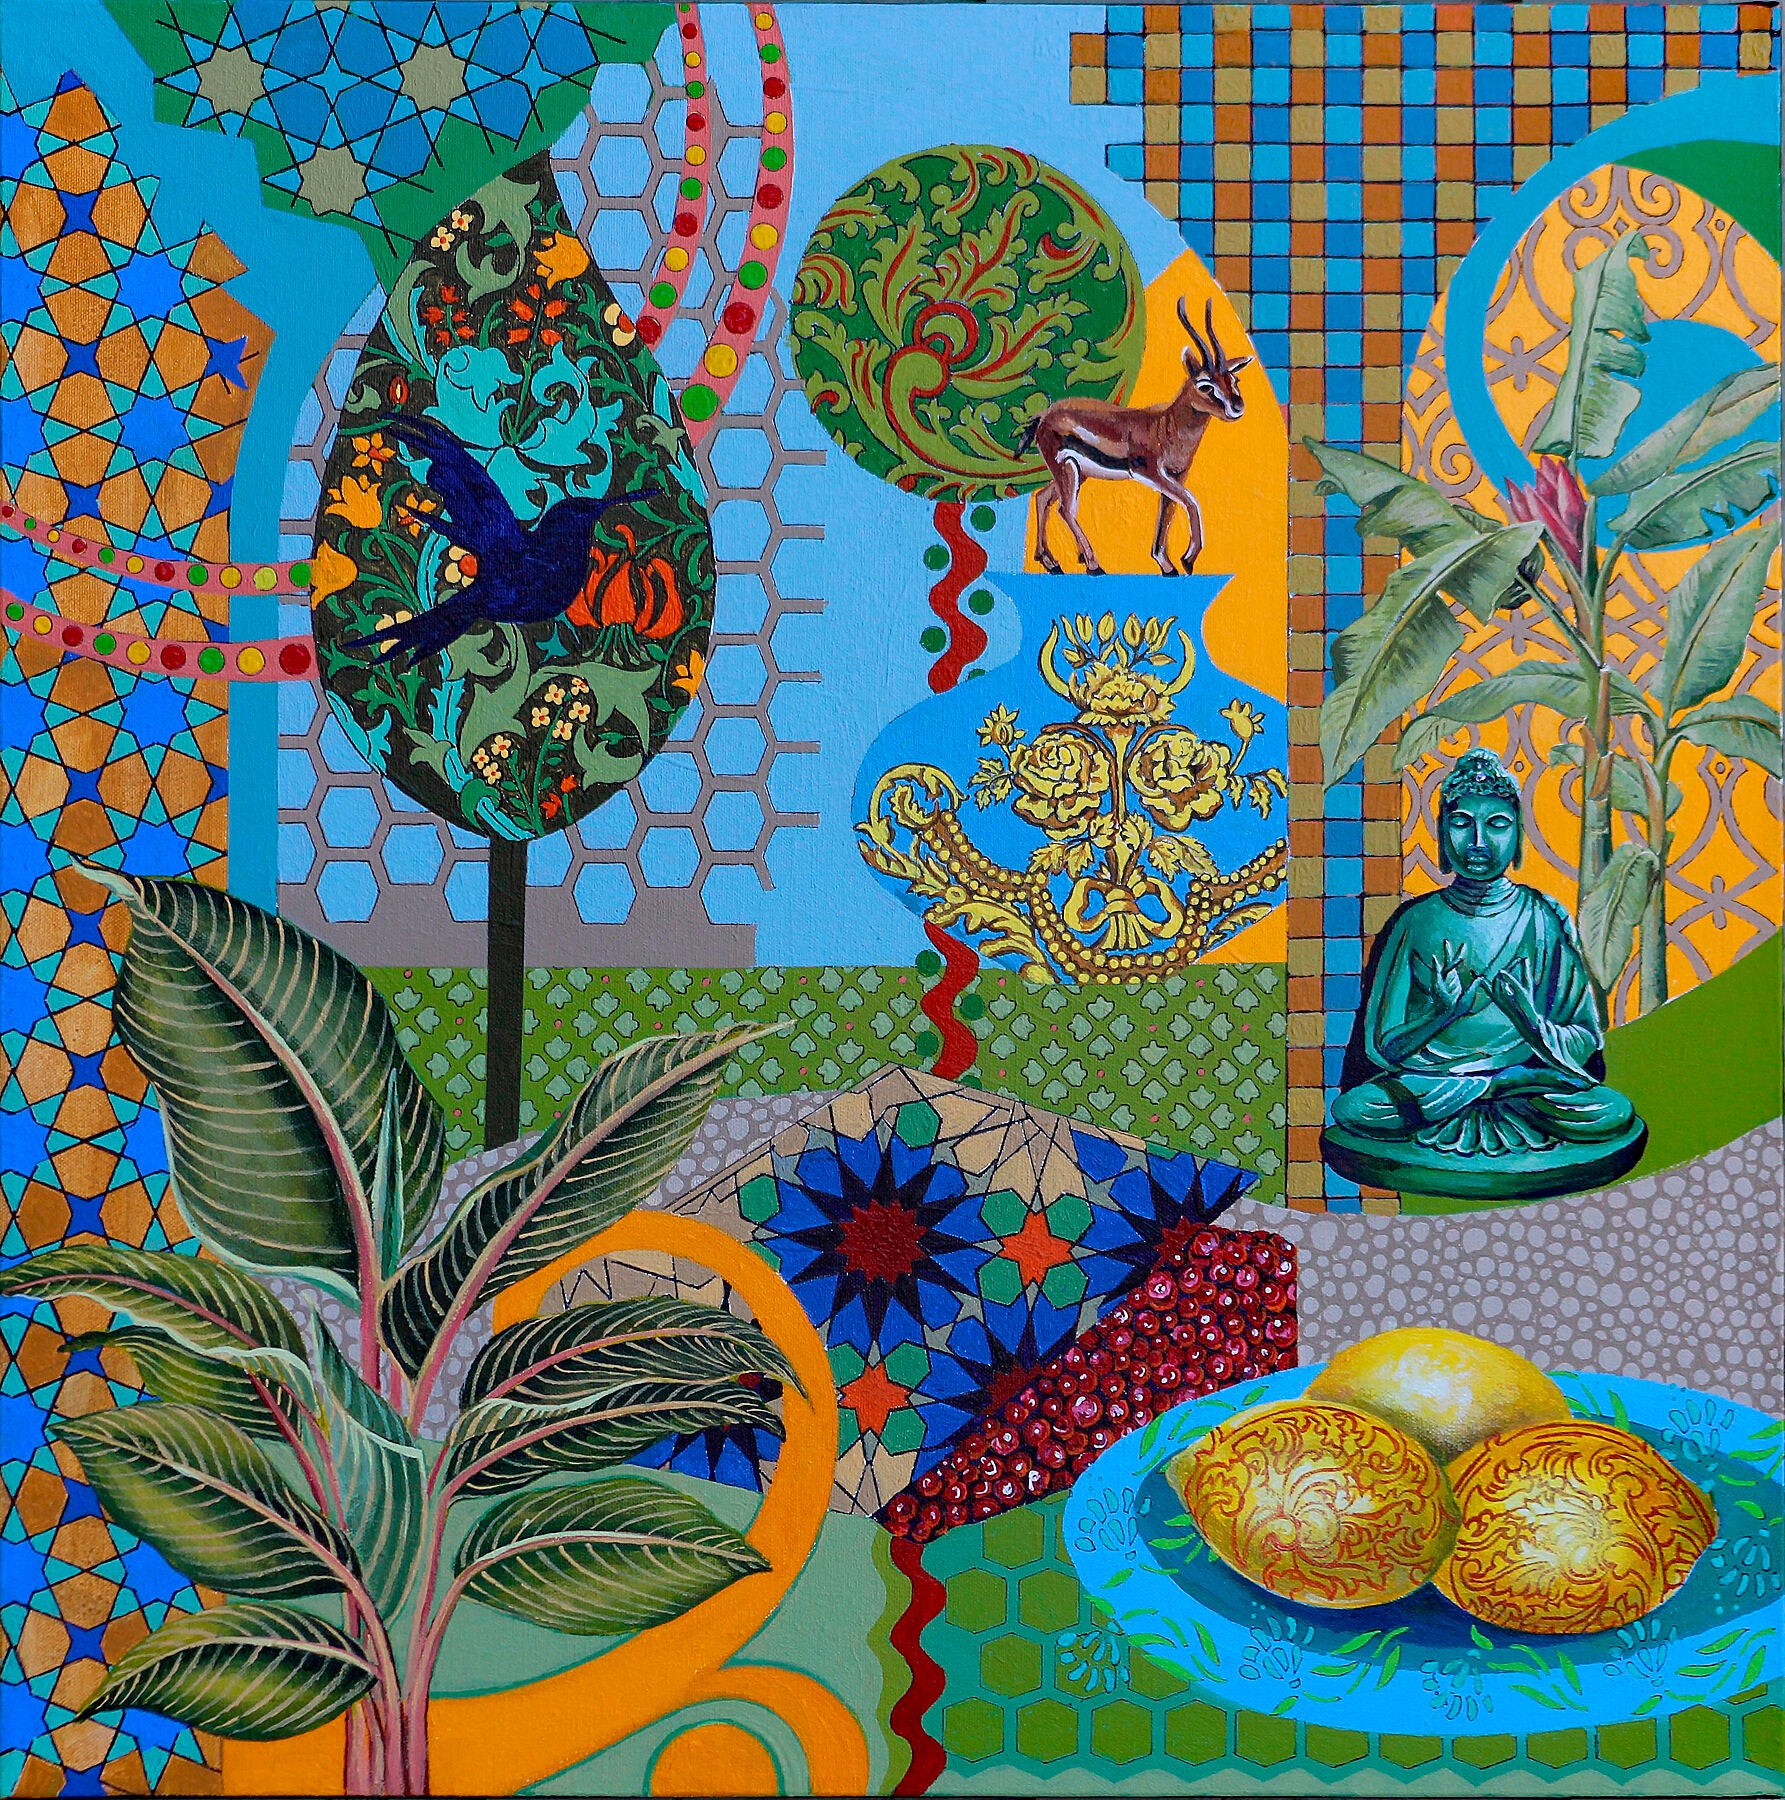 Unframed Fine Art Print: 'Love of 3 Lemons, 2020' by Frances Ferdinands is a contemporary masterpiece featuring vibrant colours and whimsical imagery of lemons, antelopes, and trees. This captivating artwork blends elements of Buddhism with modern symbolism, adding a unique touch to any space.